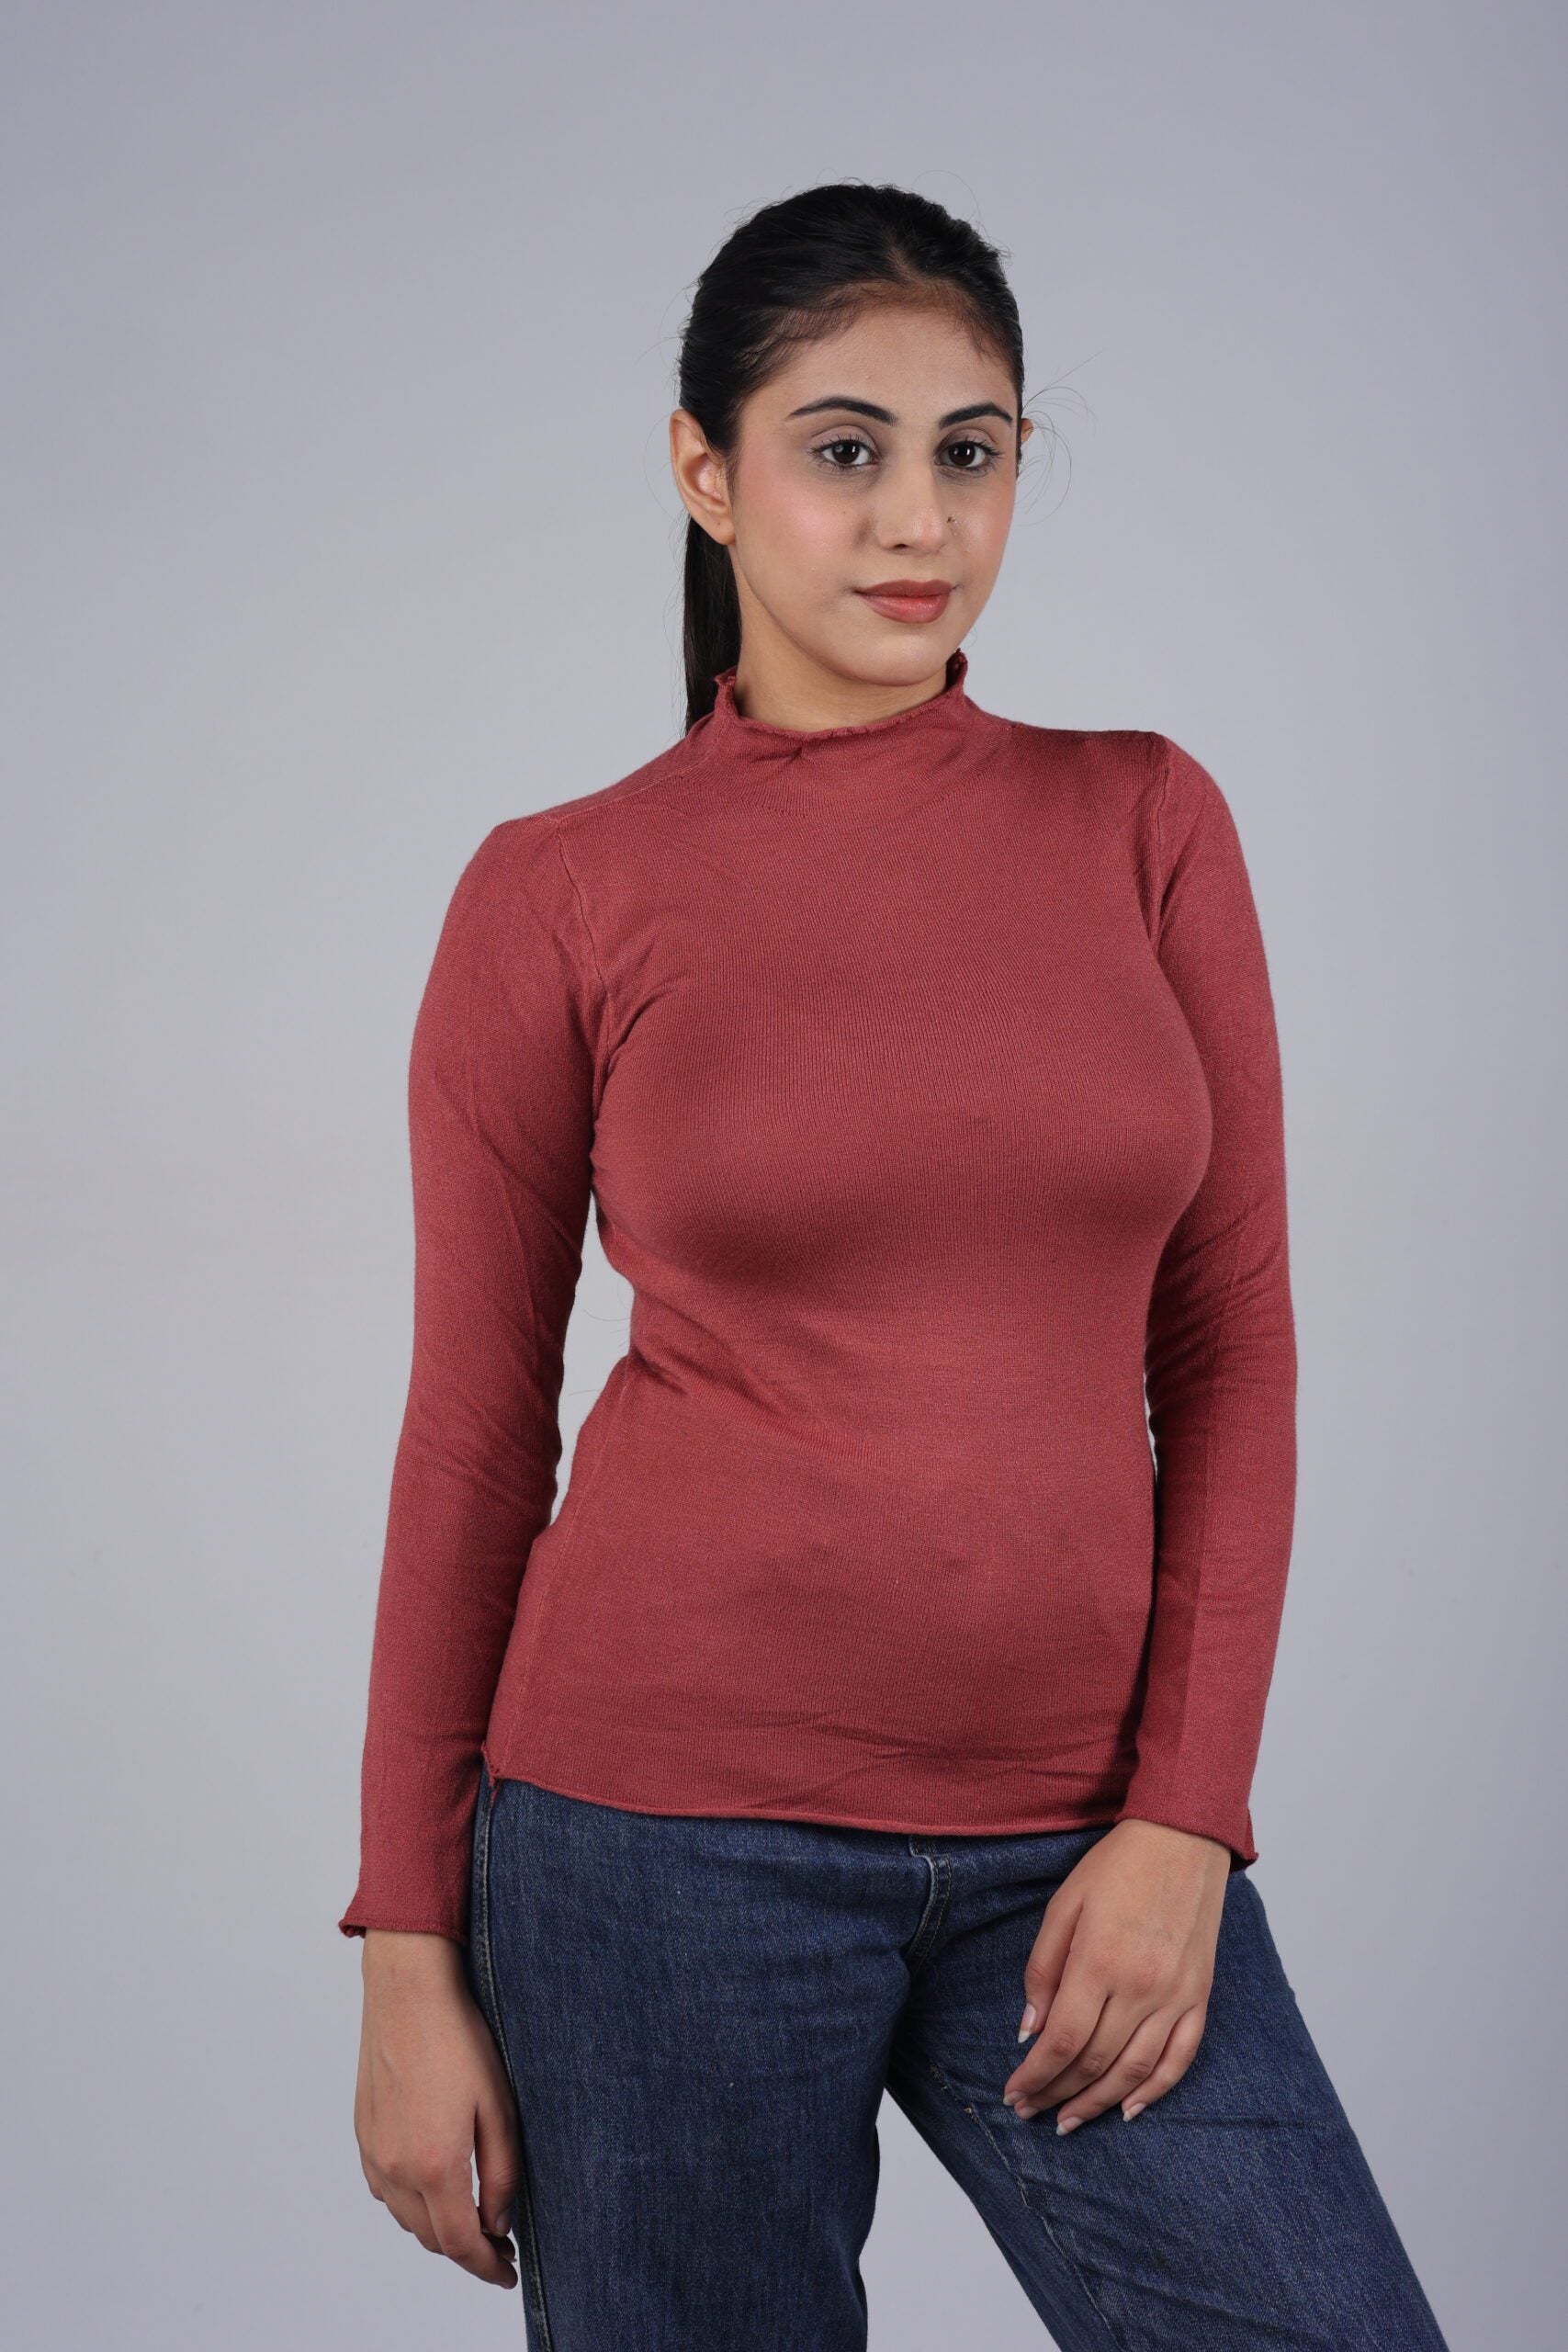 T-neck Basic Knitted Top (Peach) A Subtle Elegance for Effortless Comfort and Style!